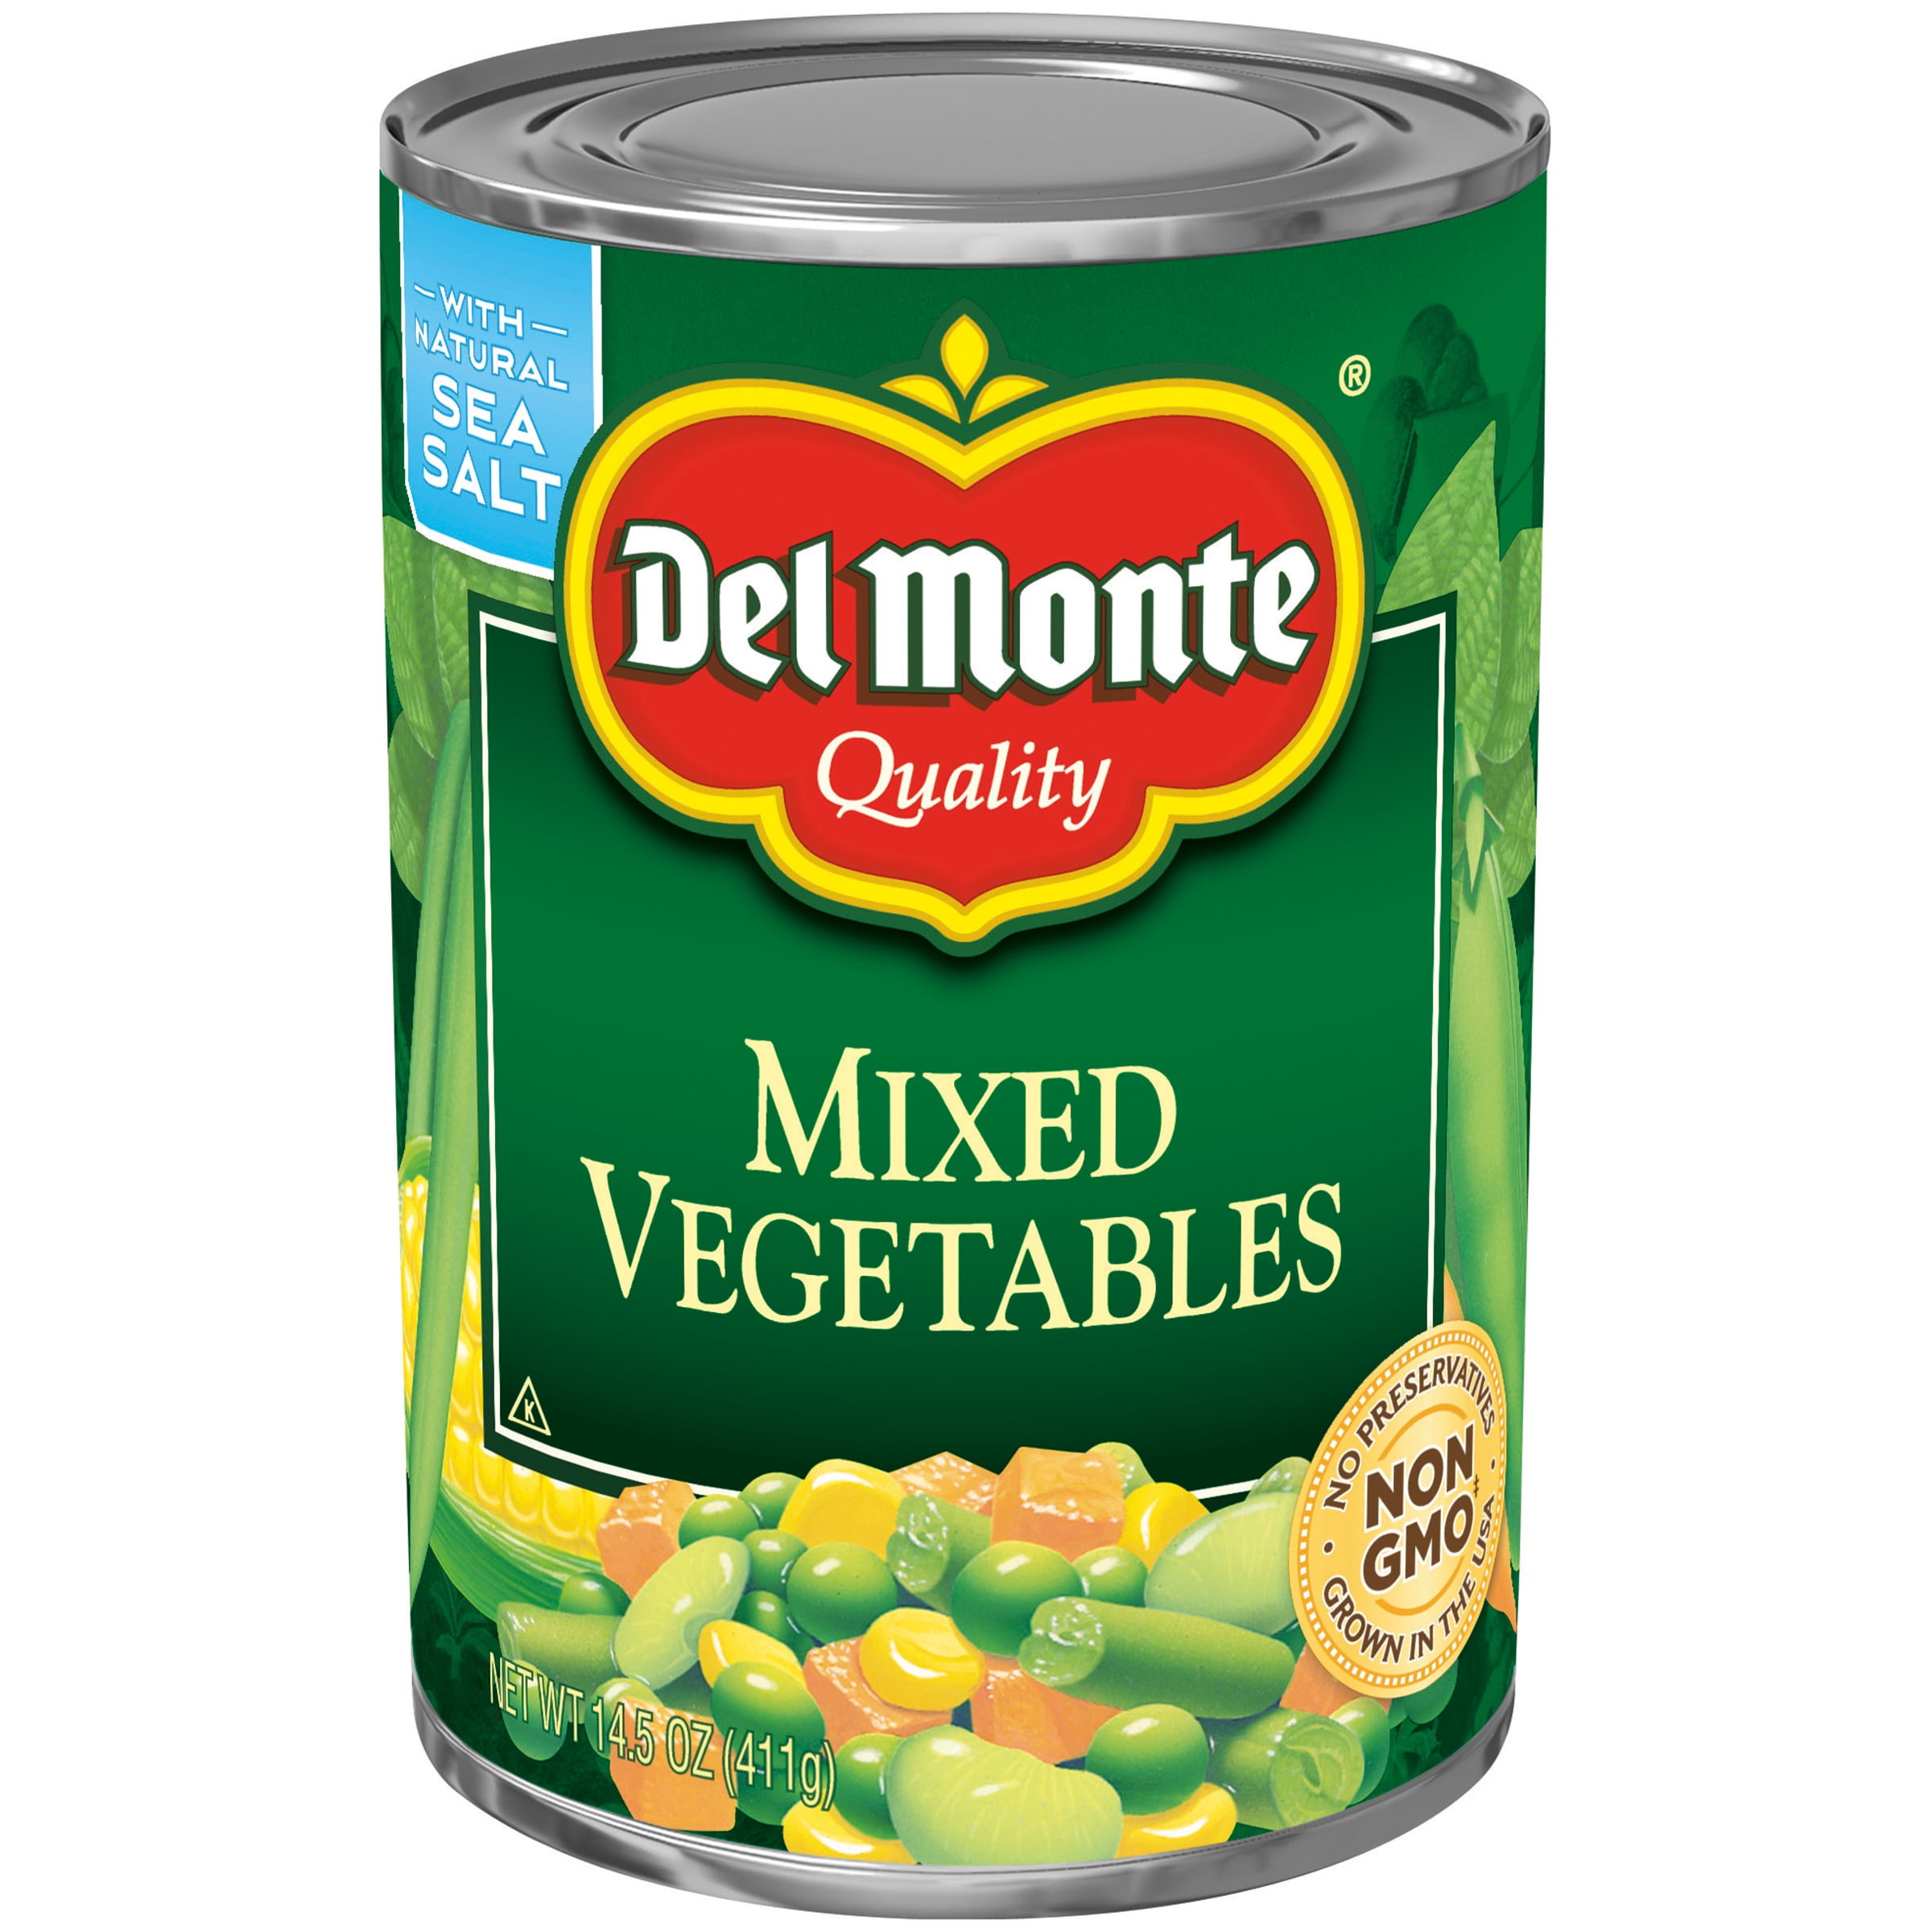 Del Monte Mixed Vegetables, Canned Vegetables, 14.5 oz Can